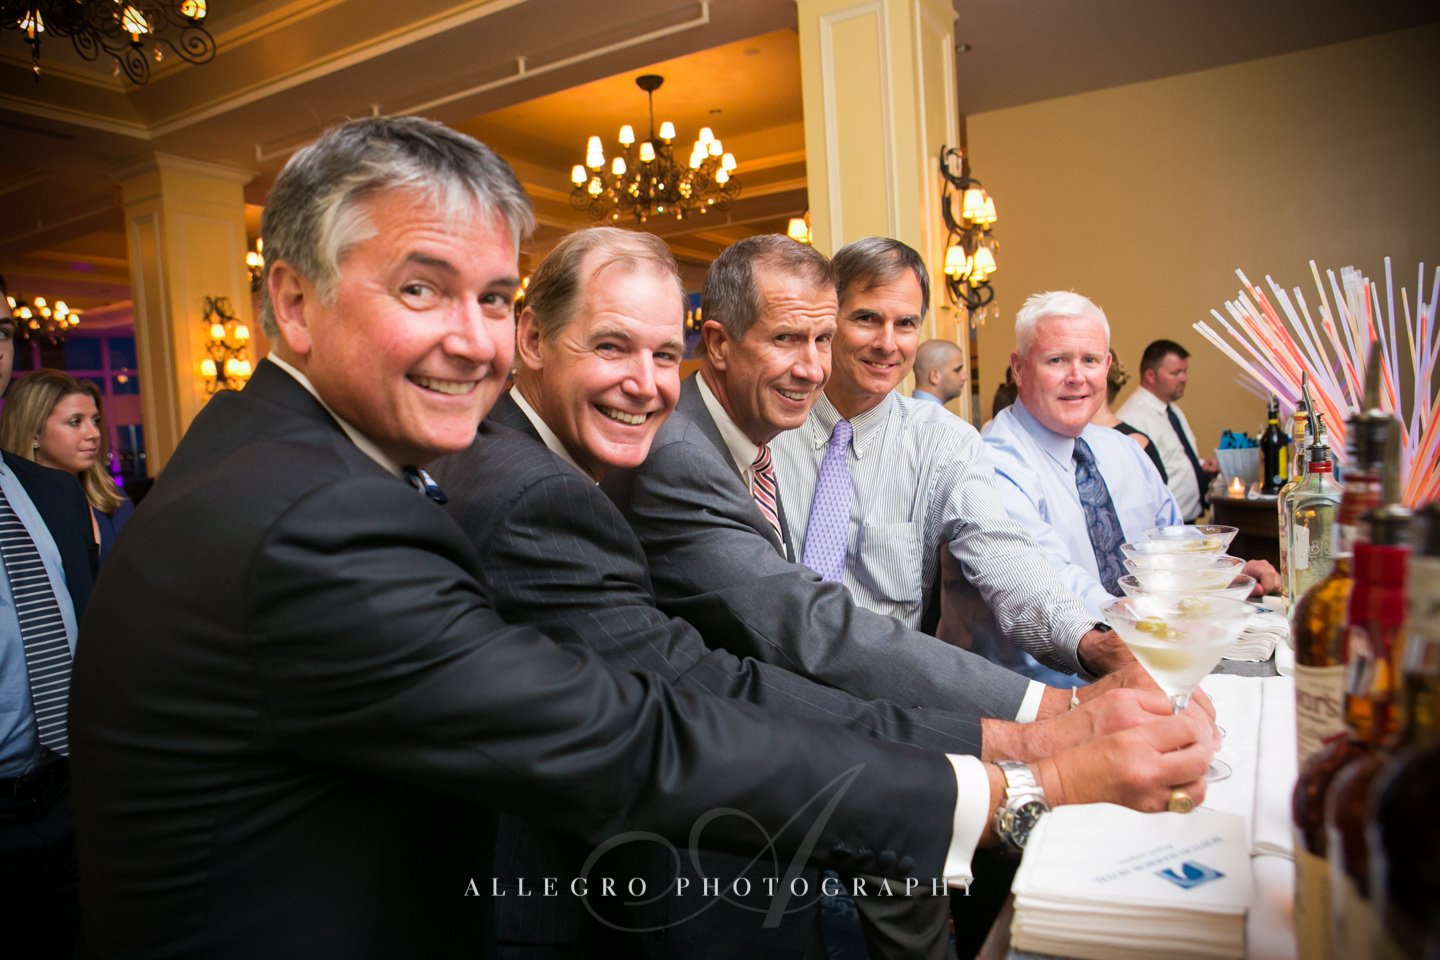 the men photo by Allegro Photography